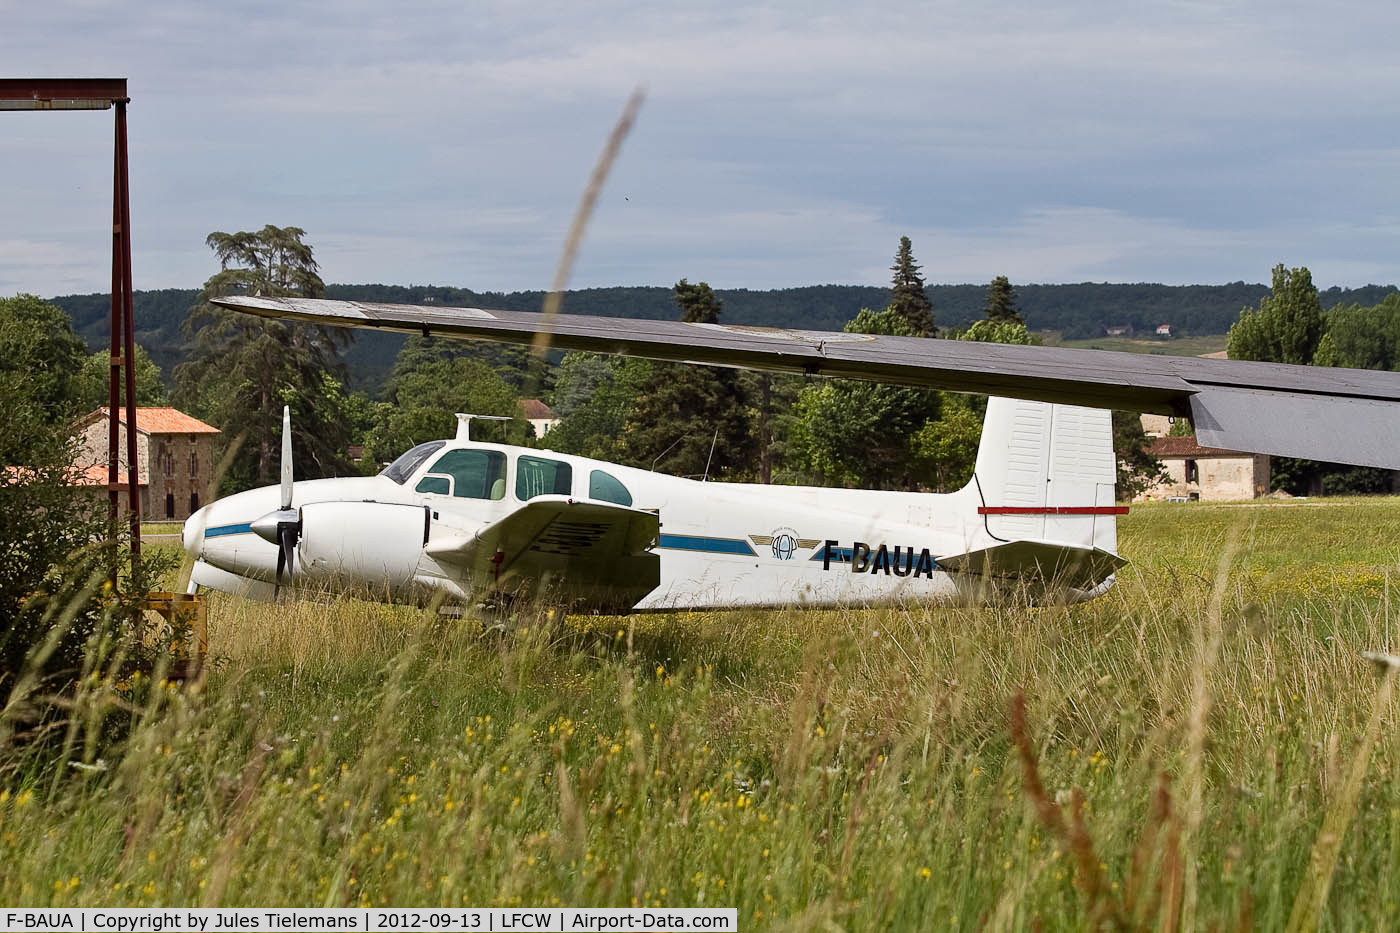 F-BAUA, 1956 Beech D50 Twin Bonanza C/N DH-39, Airplane seen in France on the arfield of Villeneuve-sur-Lot. Starboard engine missing.